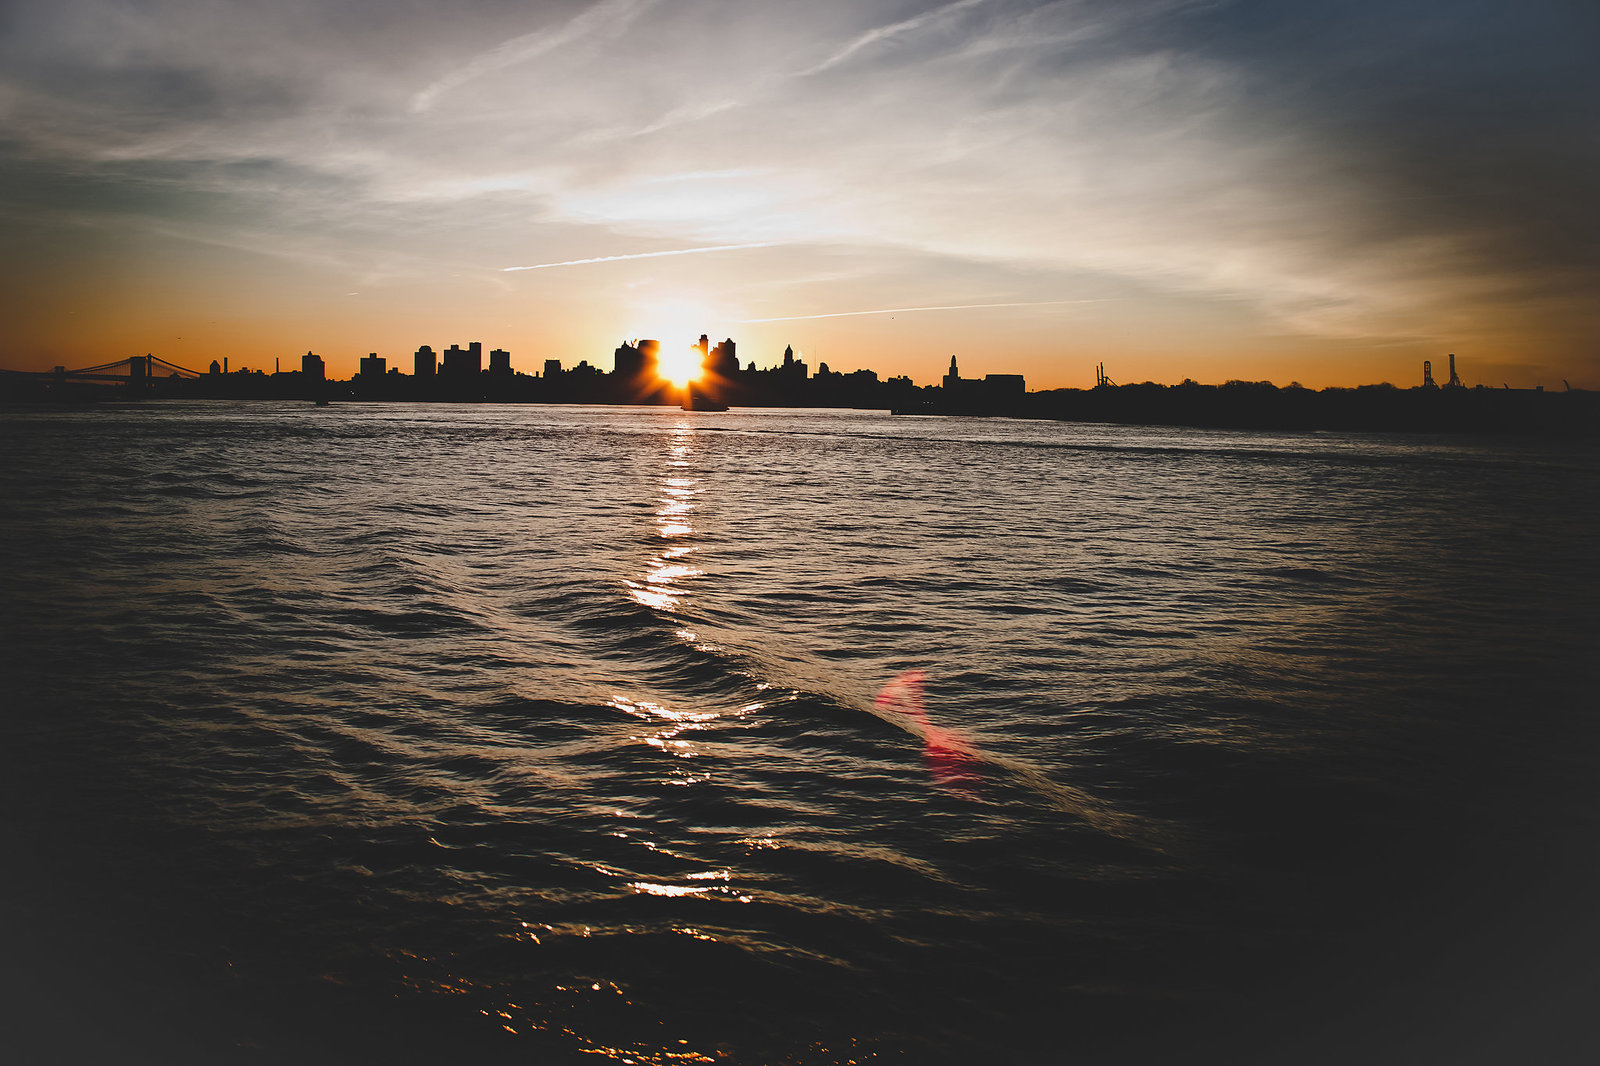 New York City skyline over the water at sunrise